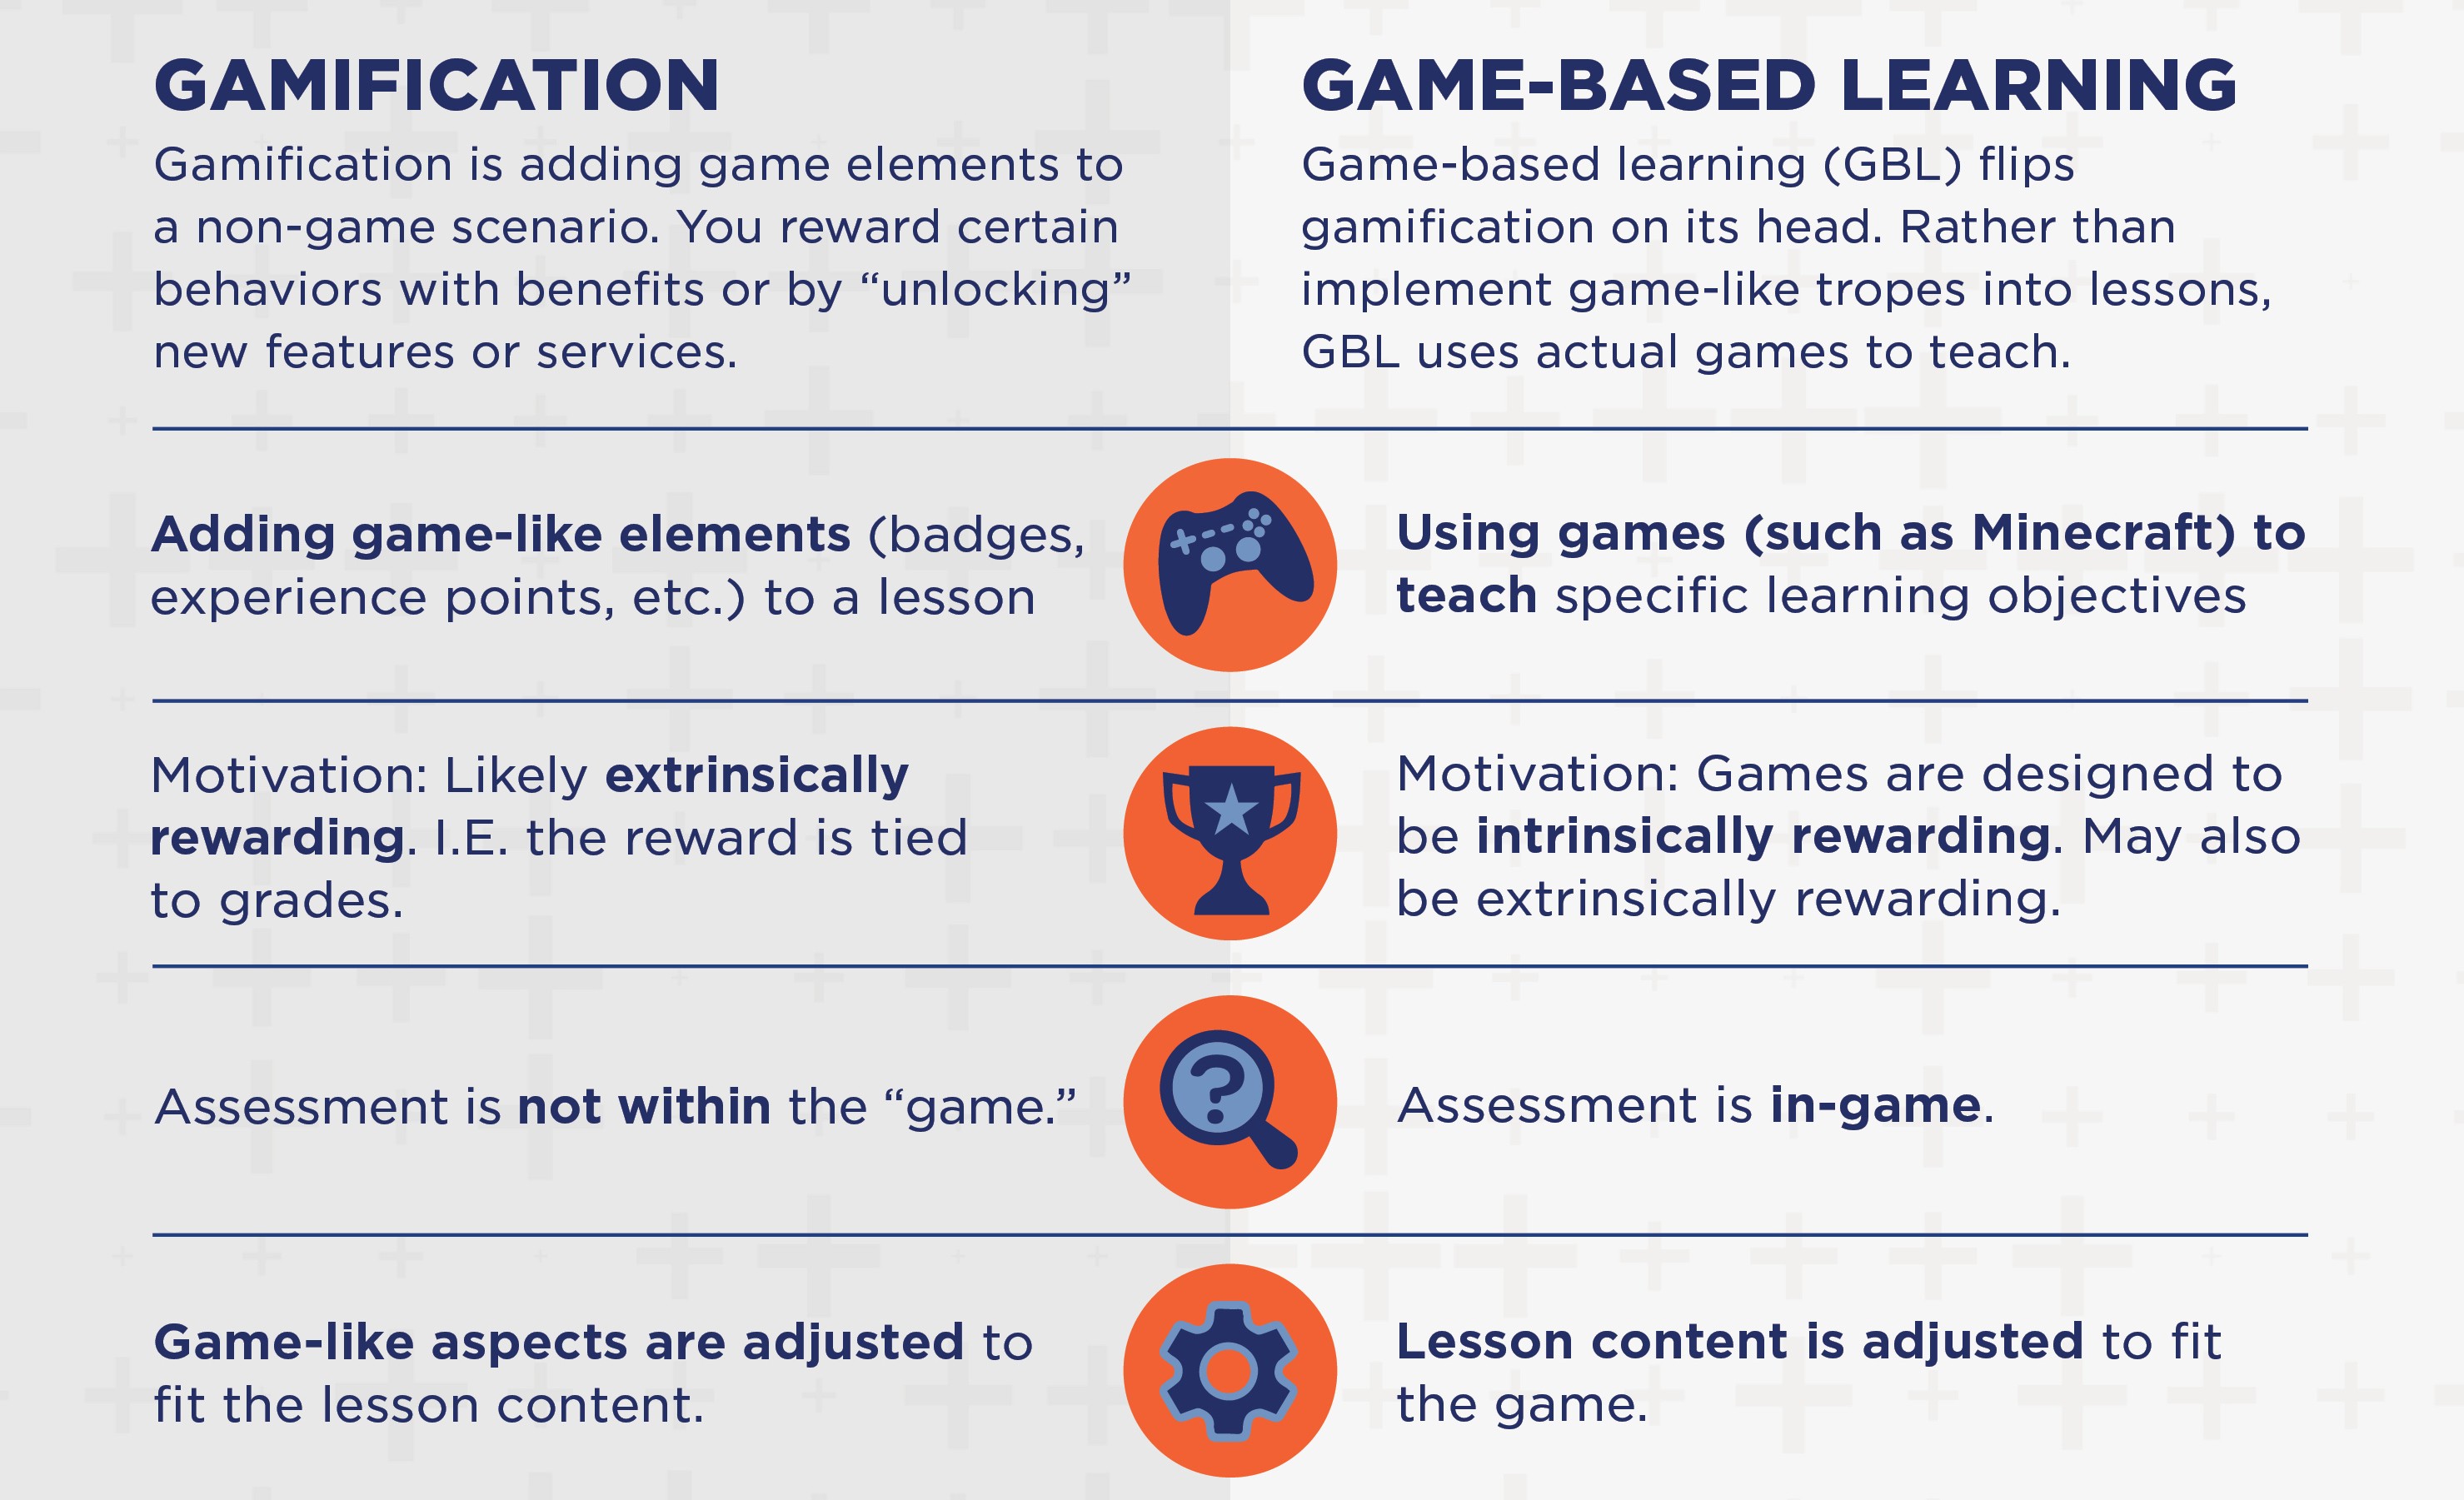 video games can be good learning tools essay